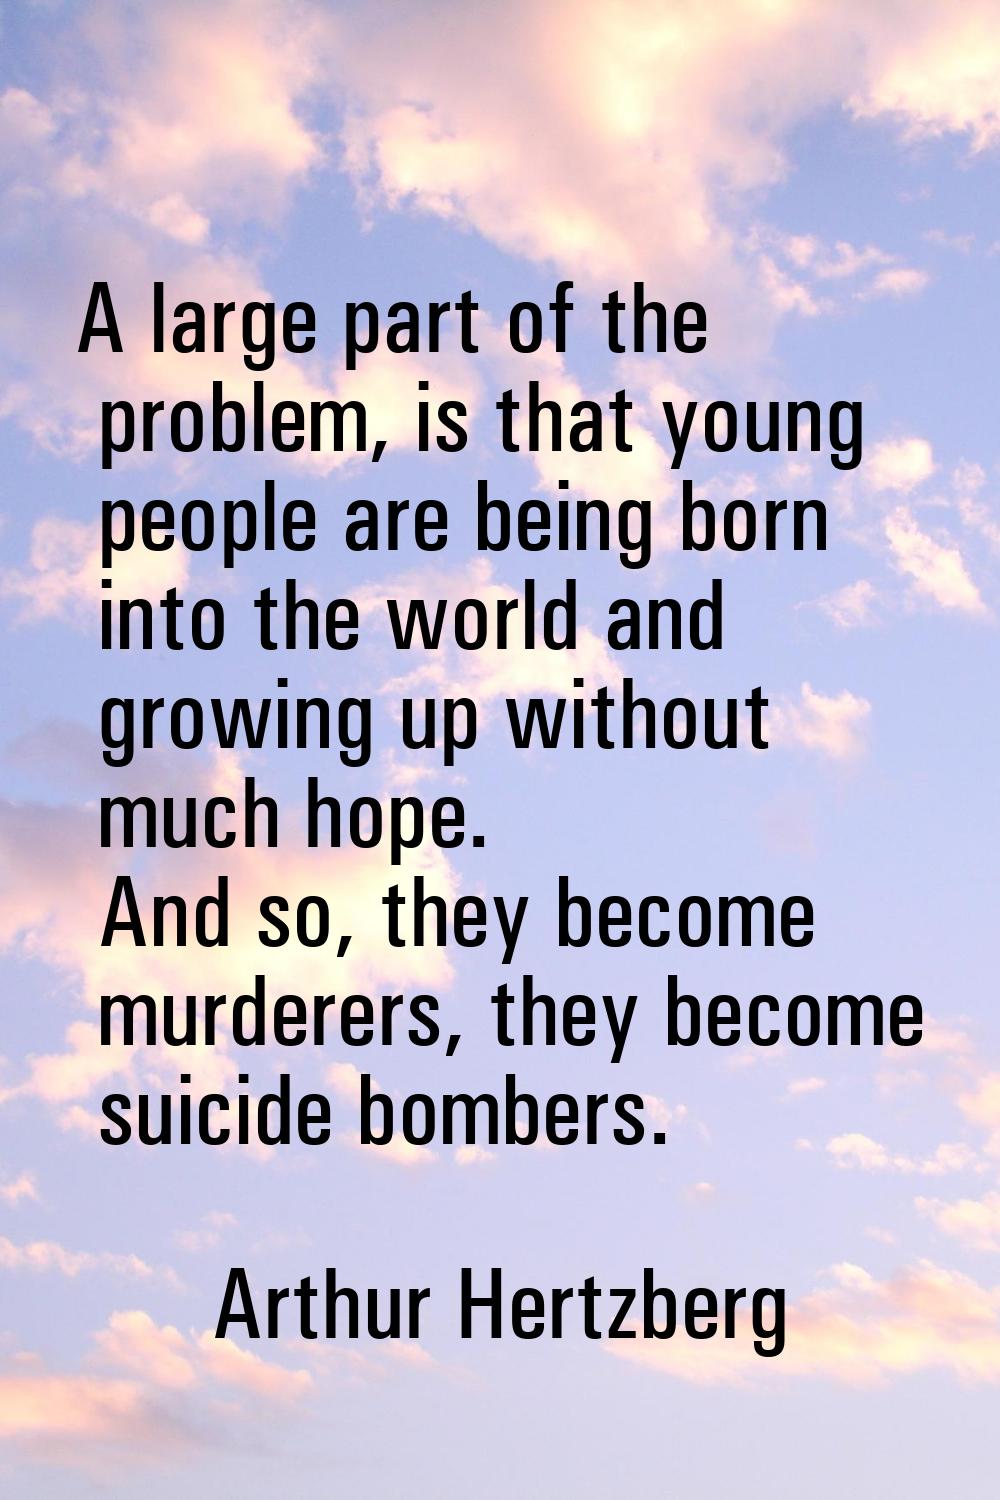 A large part of the problem, is that young people are being born into the world and growing up with